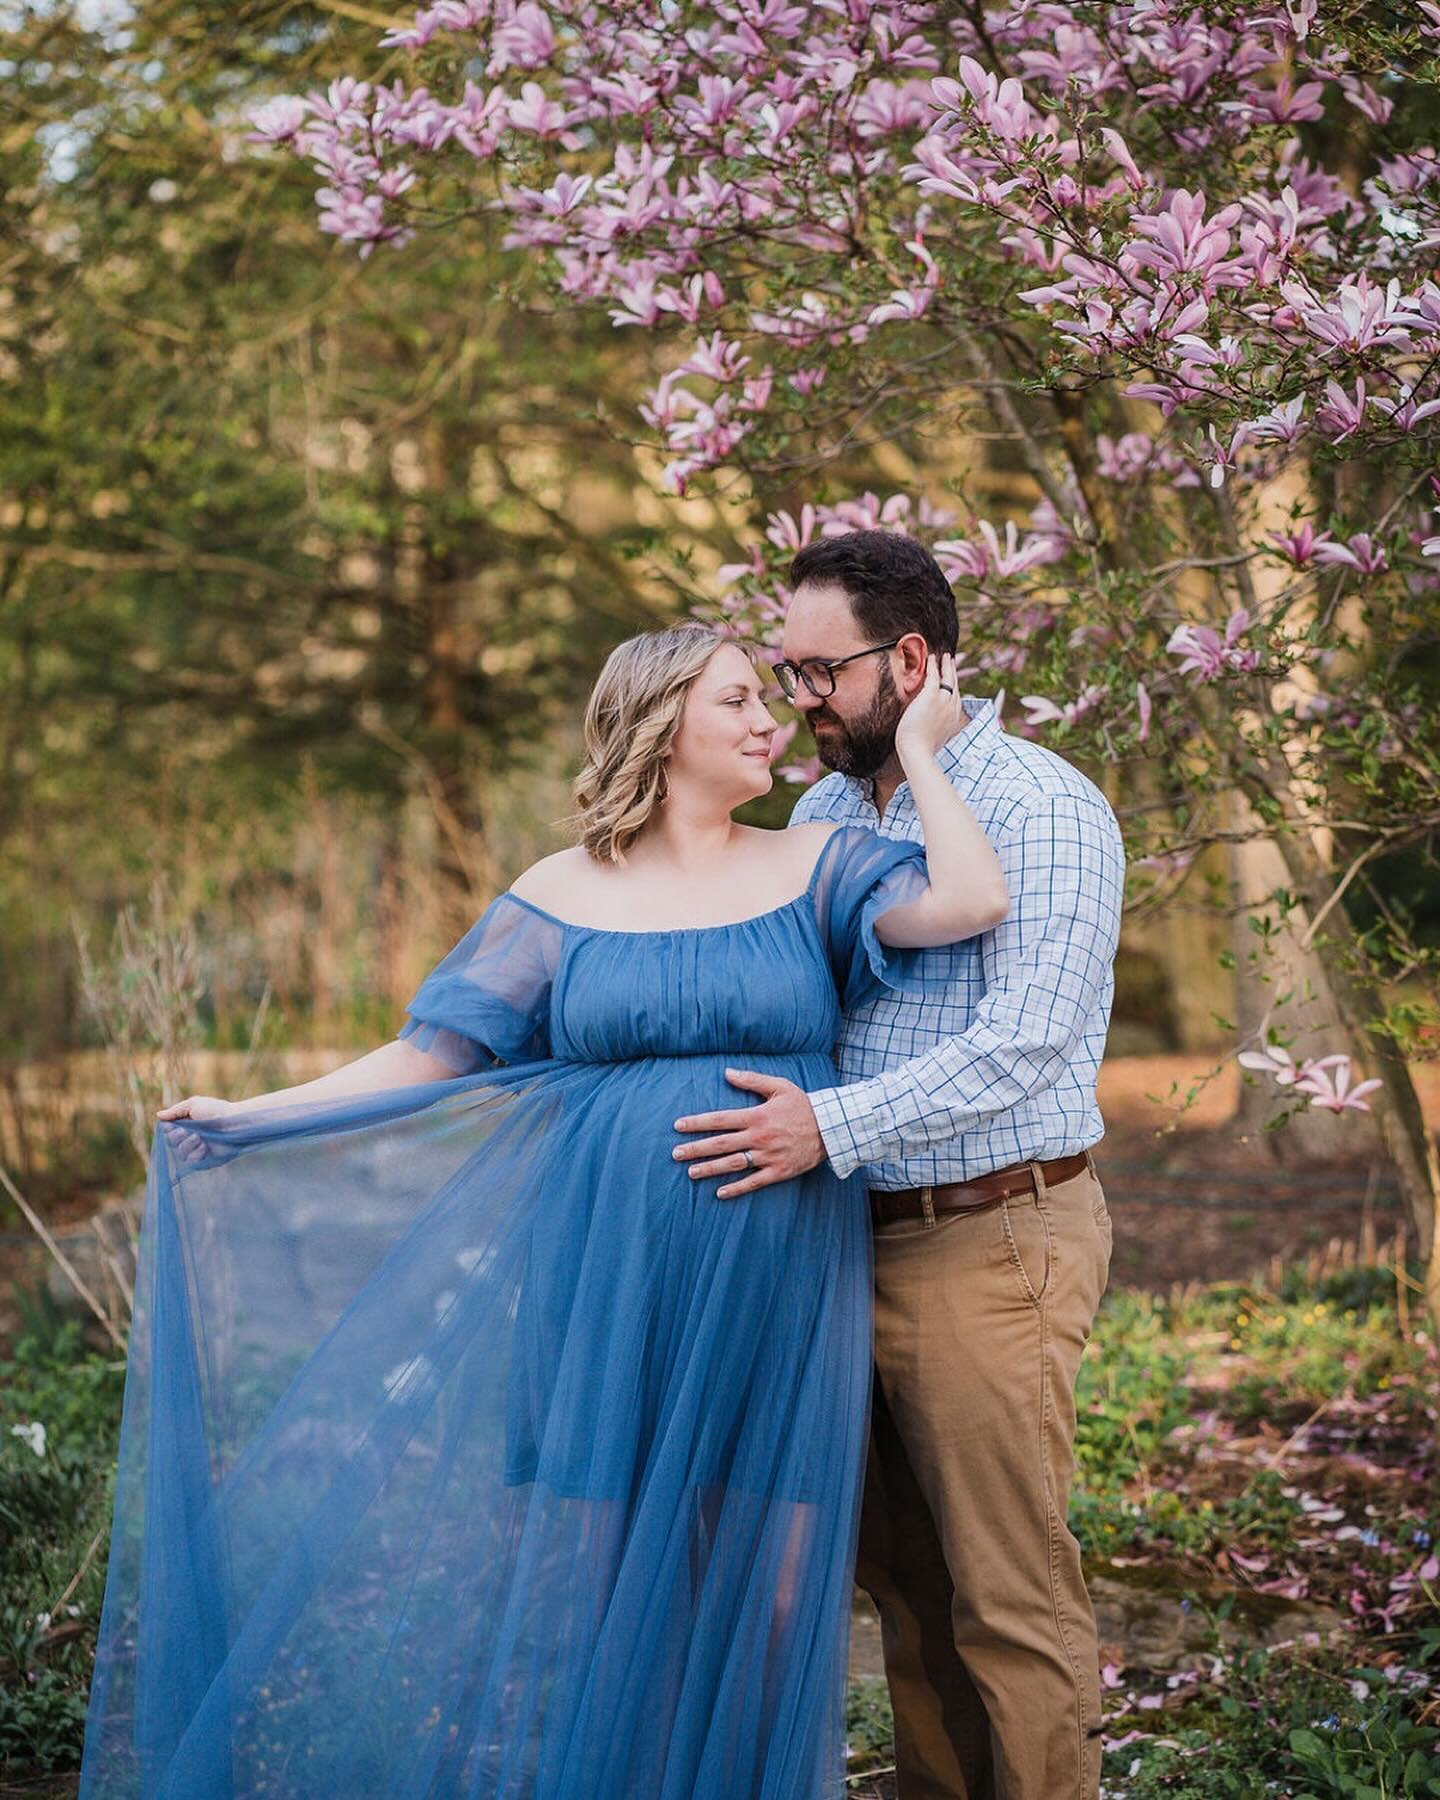 As we move out of spring and into summer I had to share one of my favorite maternity sessions from April during peak spring bloom. Flowy translucent tulle will always be a favorite to photograph and I think that periwinkle blue with the pink blossoms